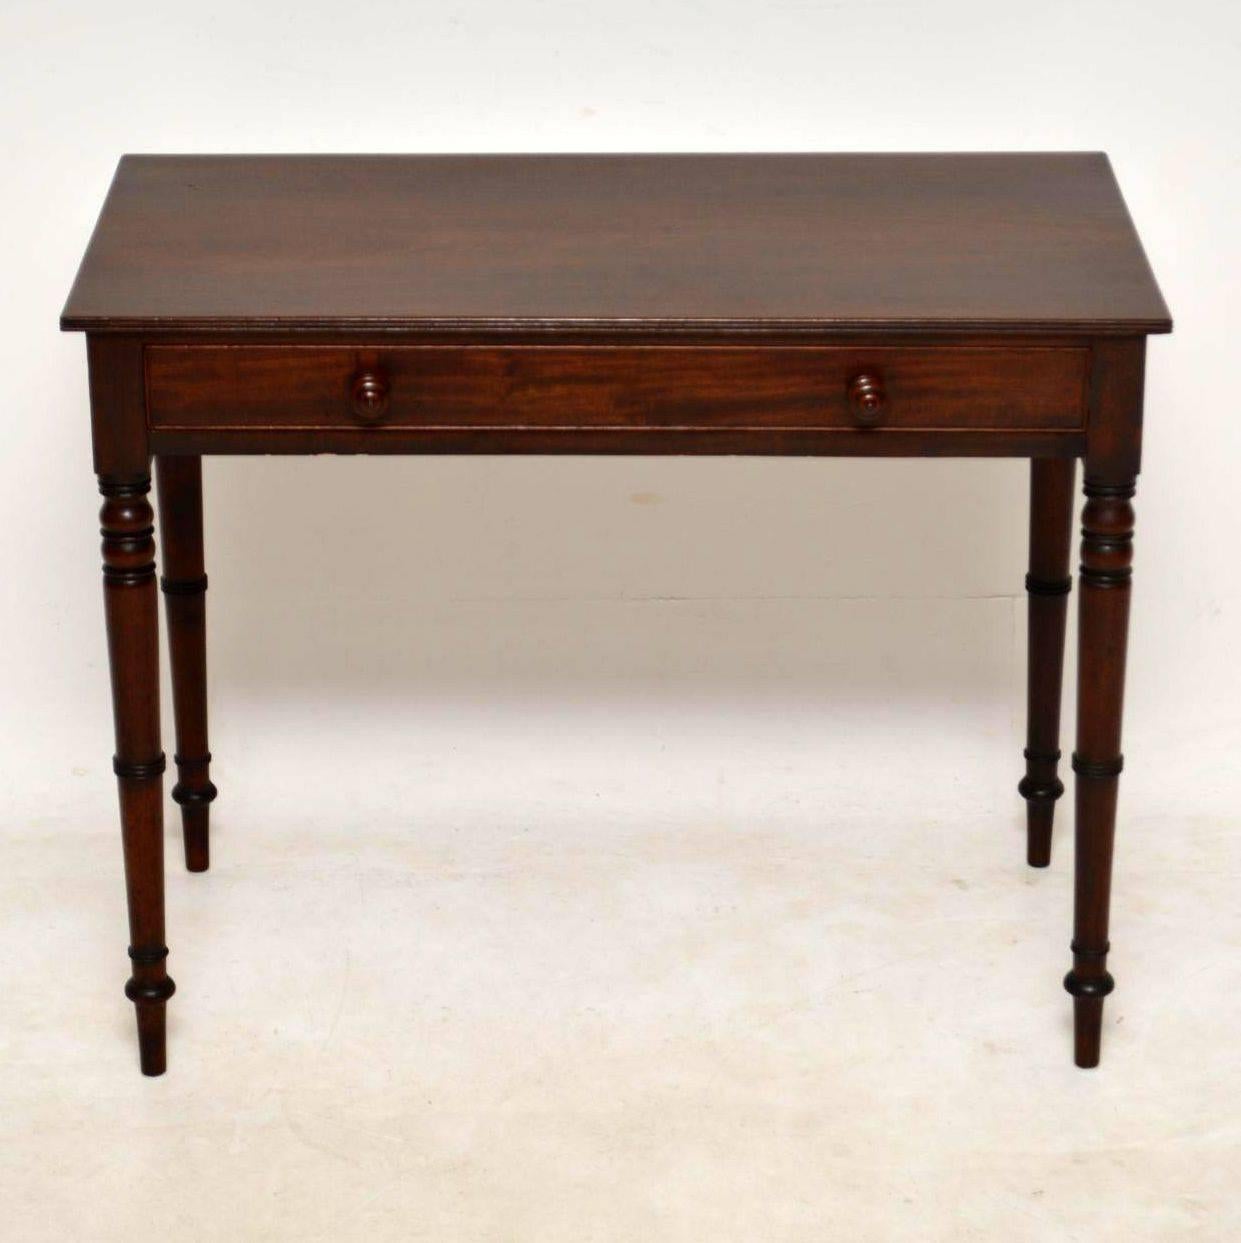 Elegant antique period Georgian writing table desk in good original condition and dating from around the 1810s-1820s period. The top is solid mahogany and has a reeded edge. There's one long drawer with a cock-beading edge, fine dovetails and turned